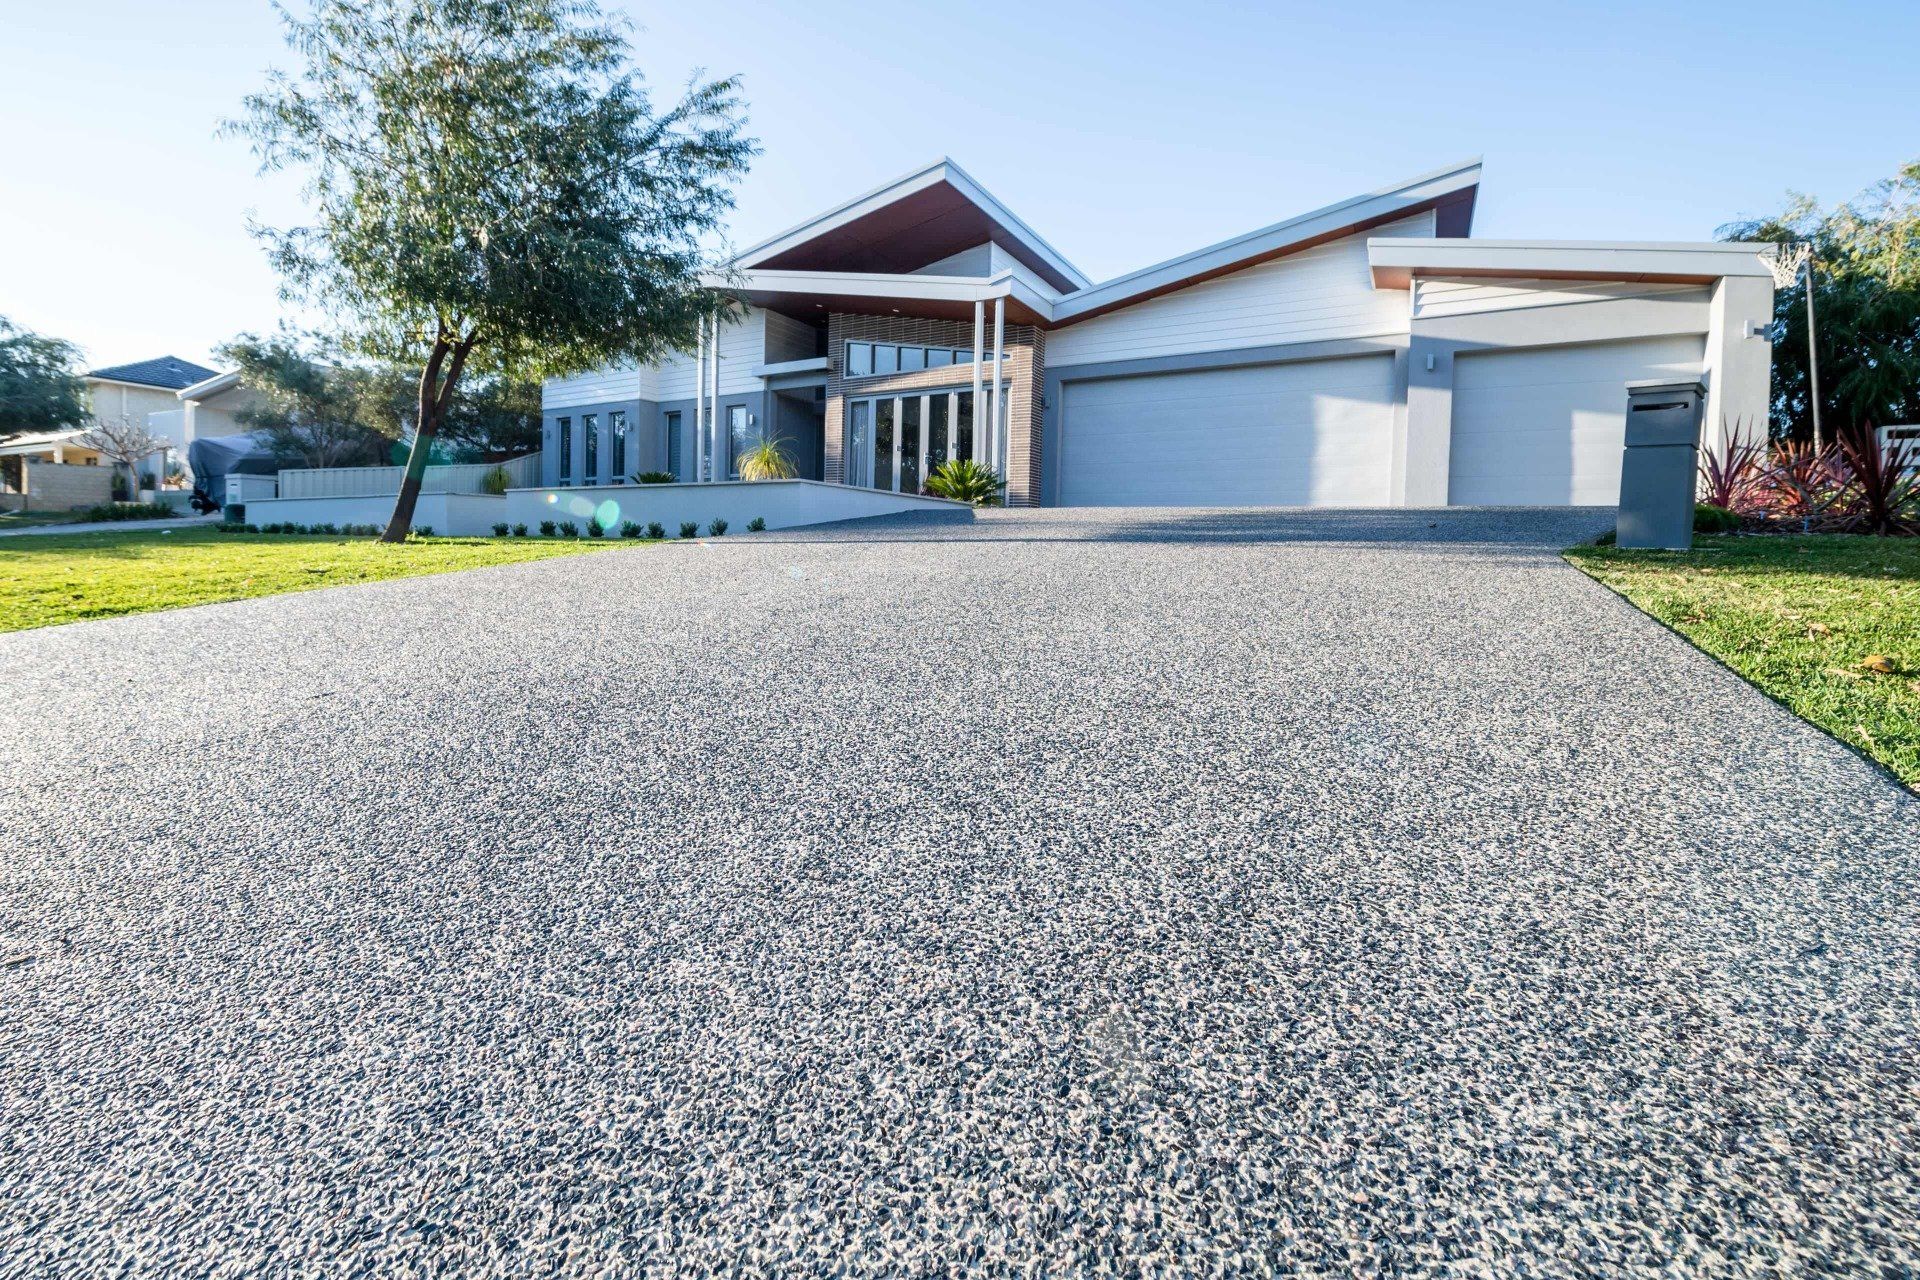 exposed aggregate driveway installed in a modern home in Coral Springs FL